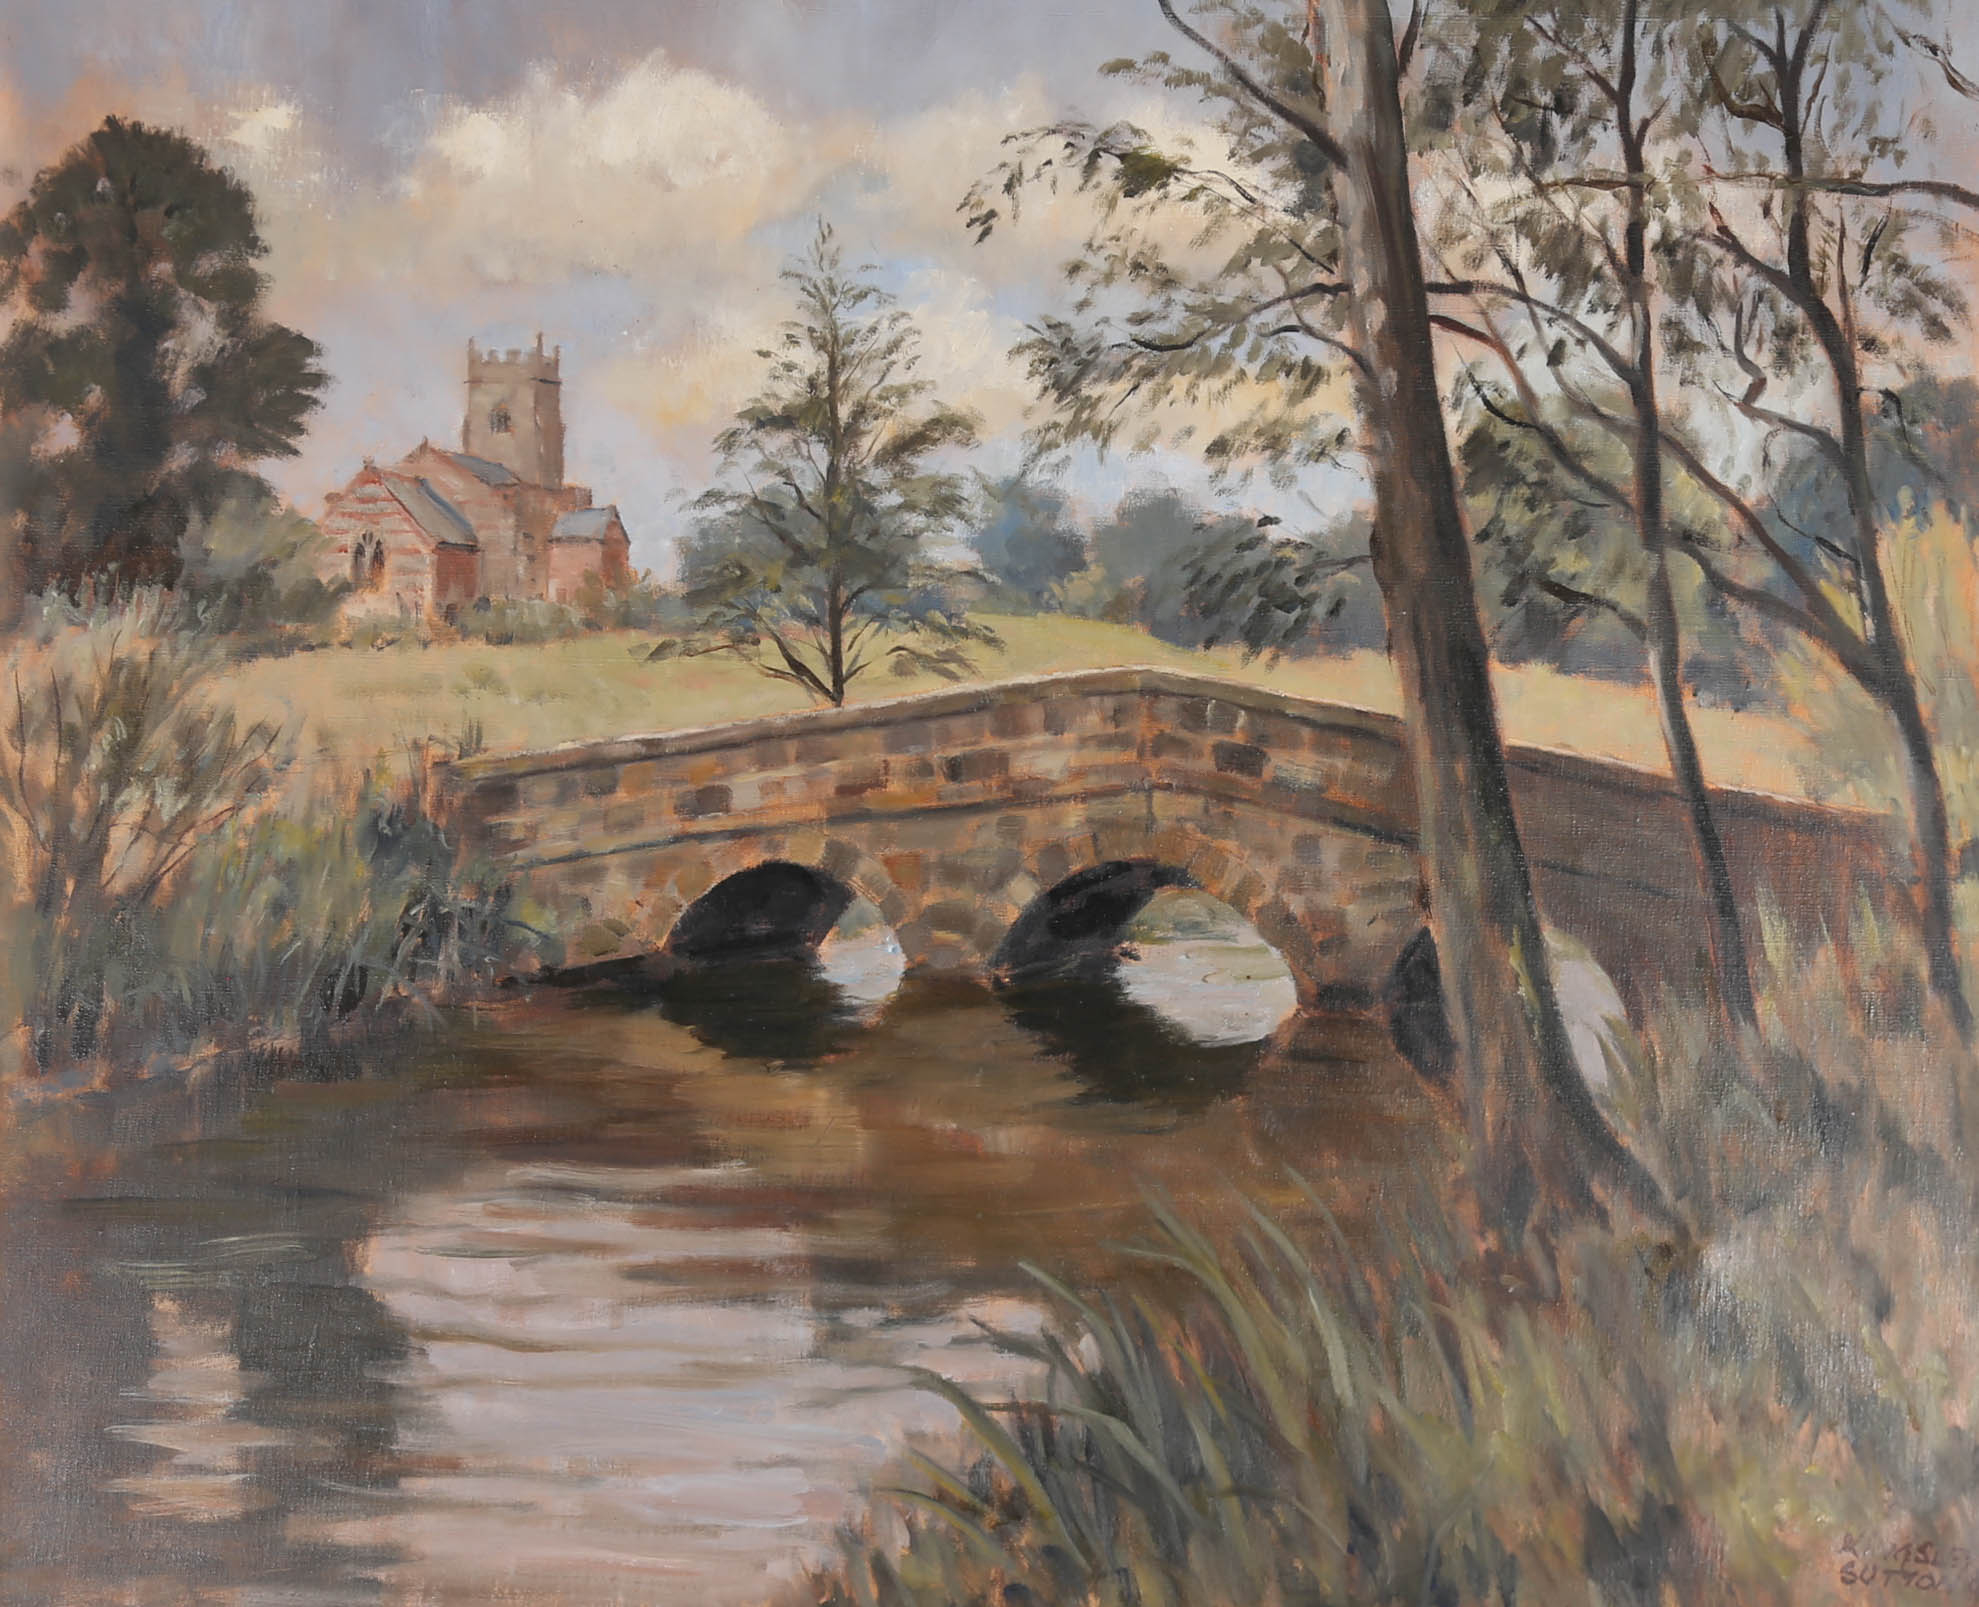 This original mid 20th century oil by British artist John Kingsley Sutton FRSA (1907-1976) , depicts a quiet river landscape with a pretty stone bridge crossing and a distance view of a grand town church. The painting is signed and dated to the